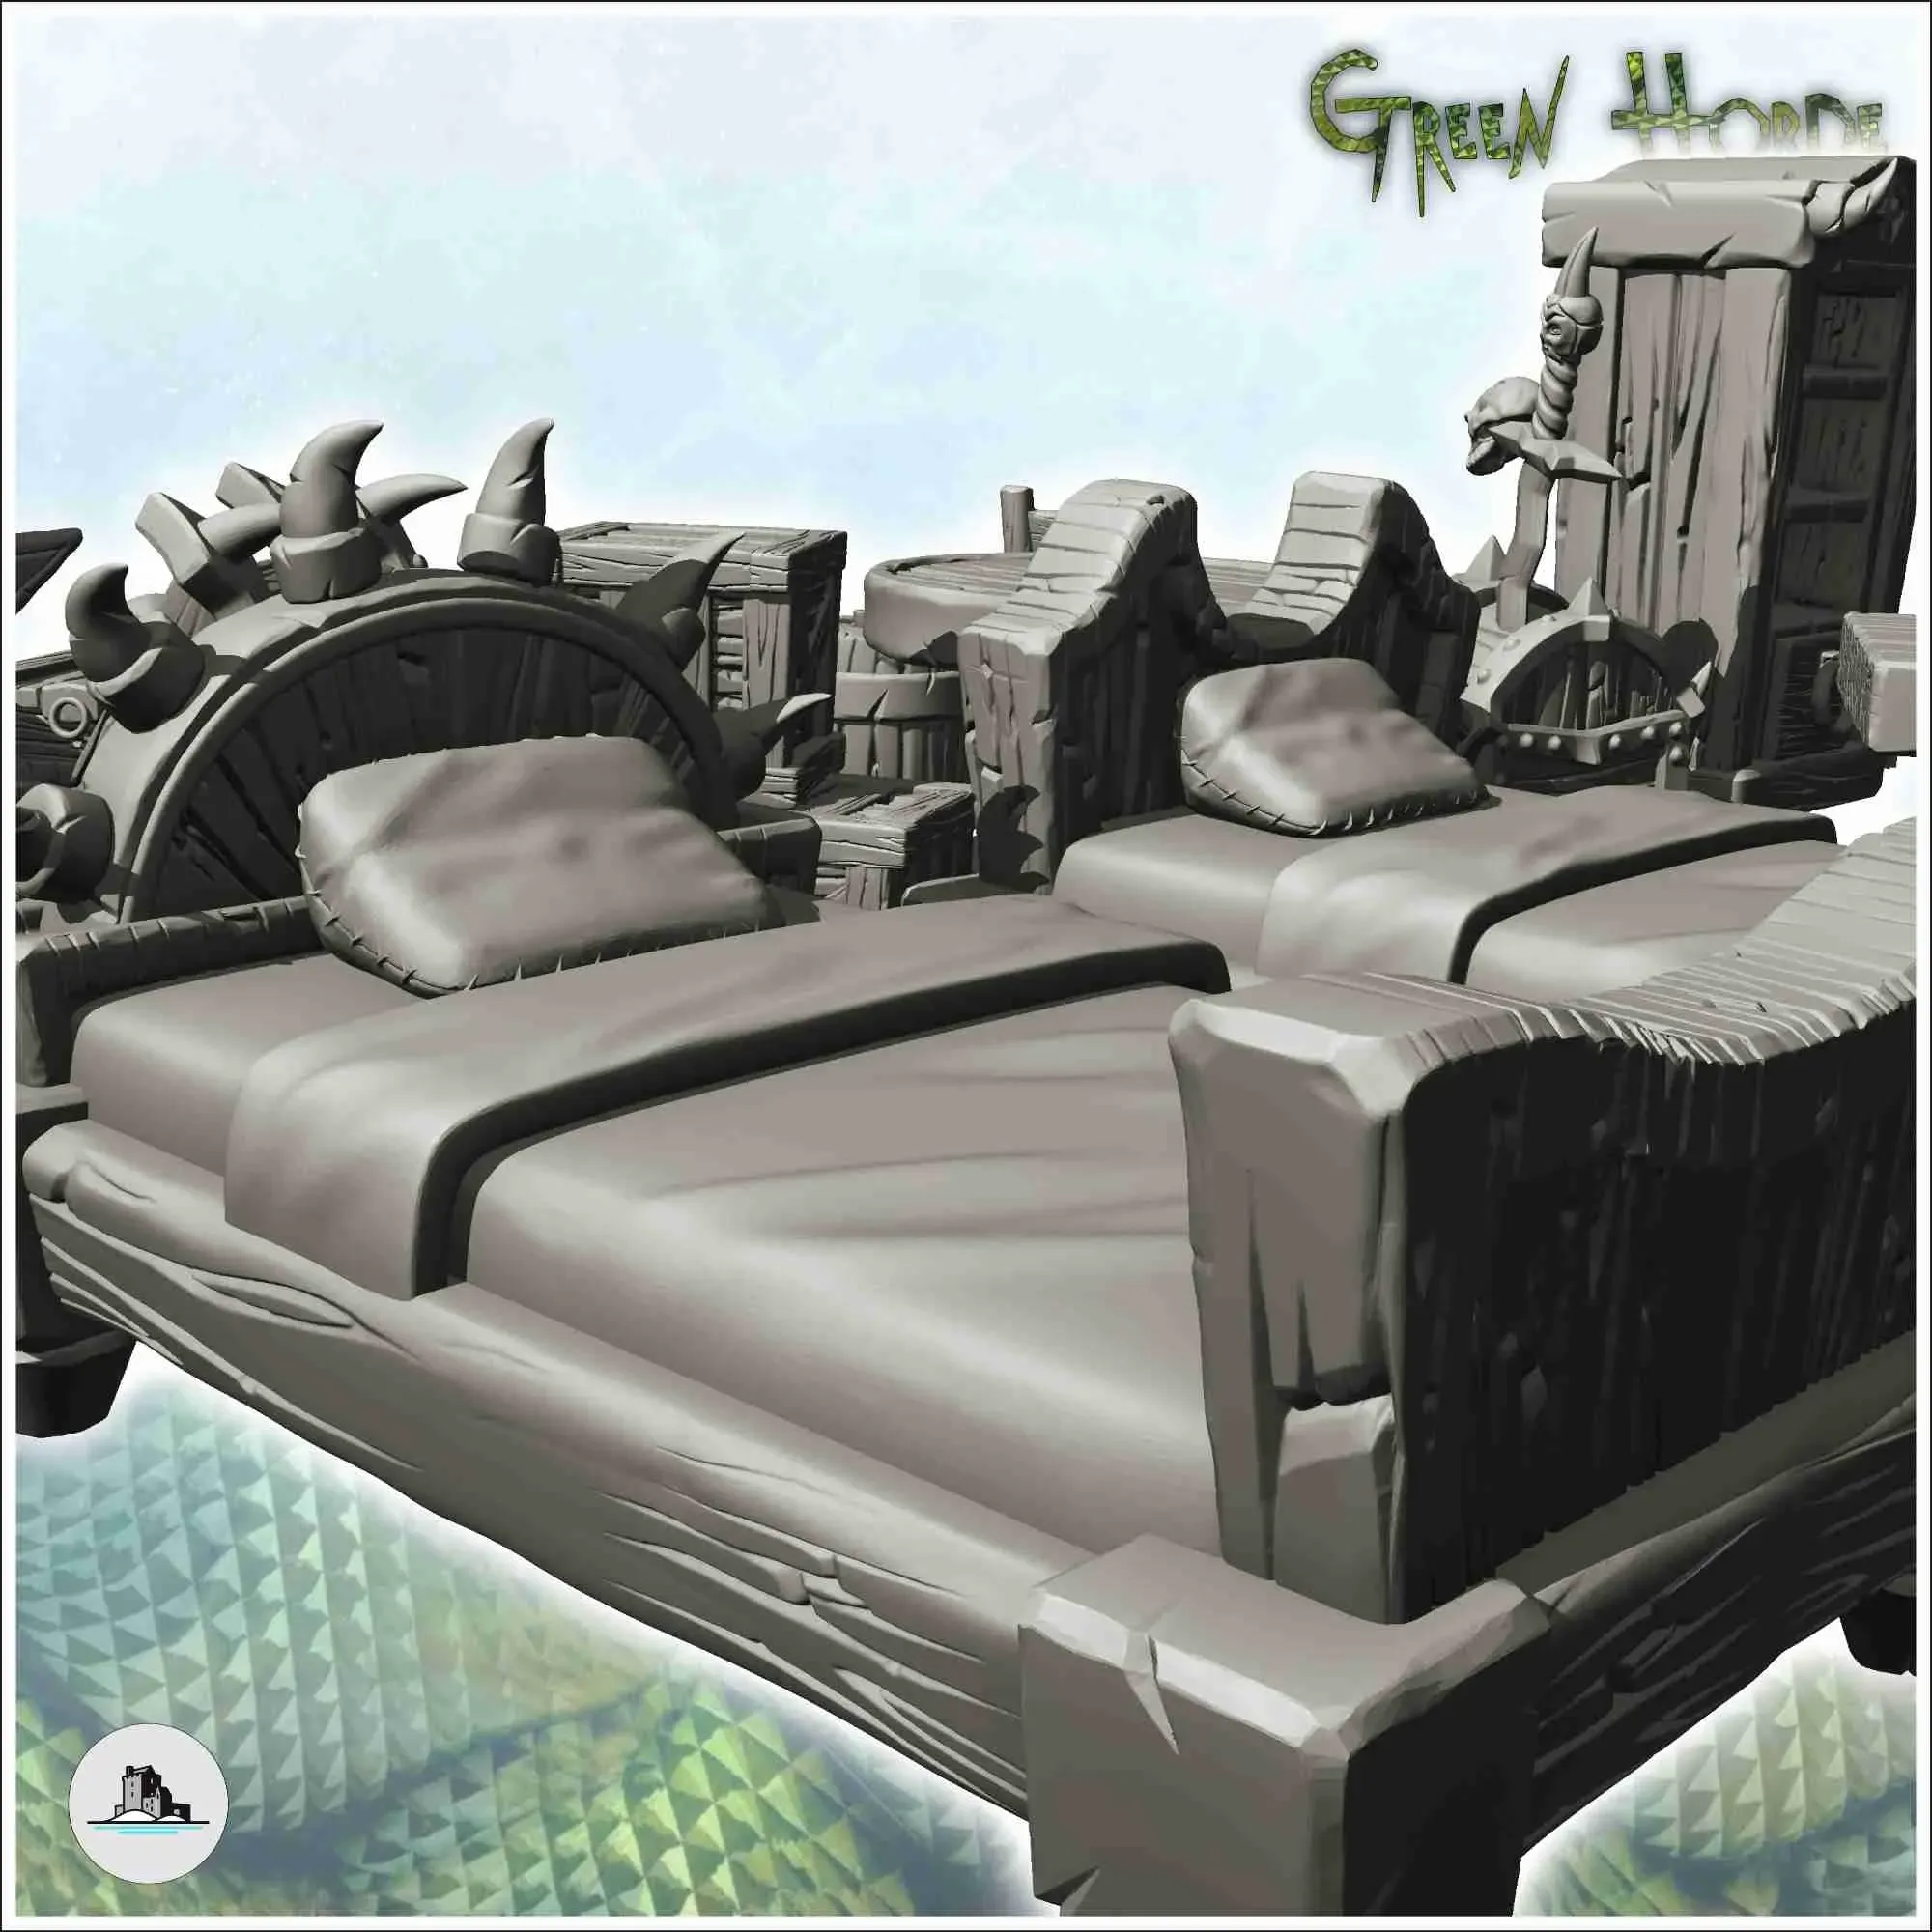 Chaos interior furniture set with beds and trophy (16) - min